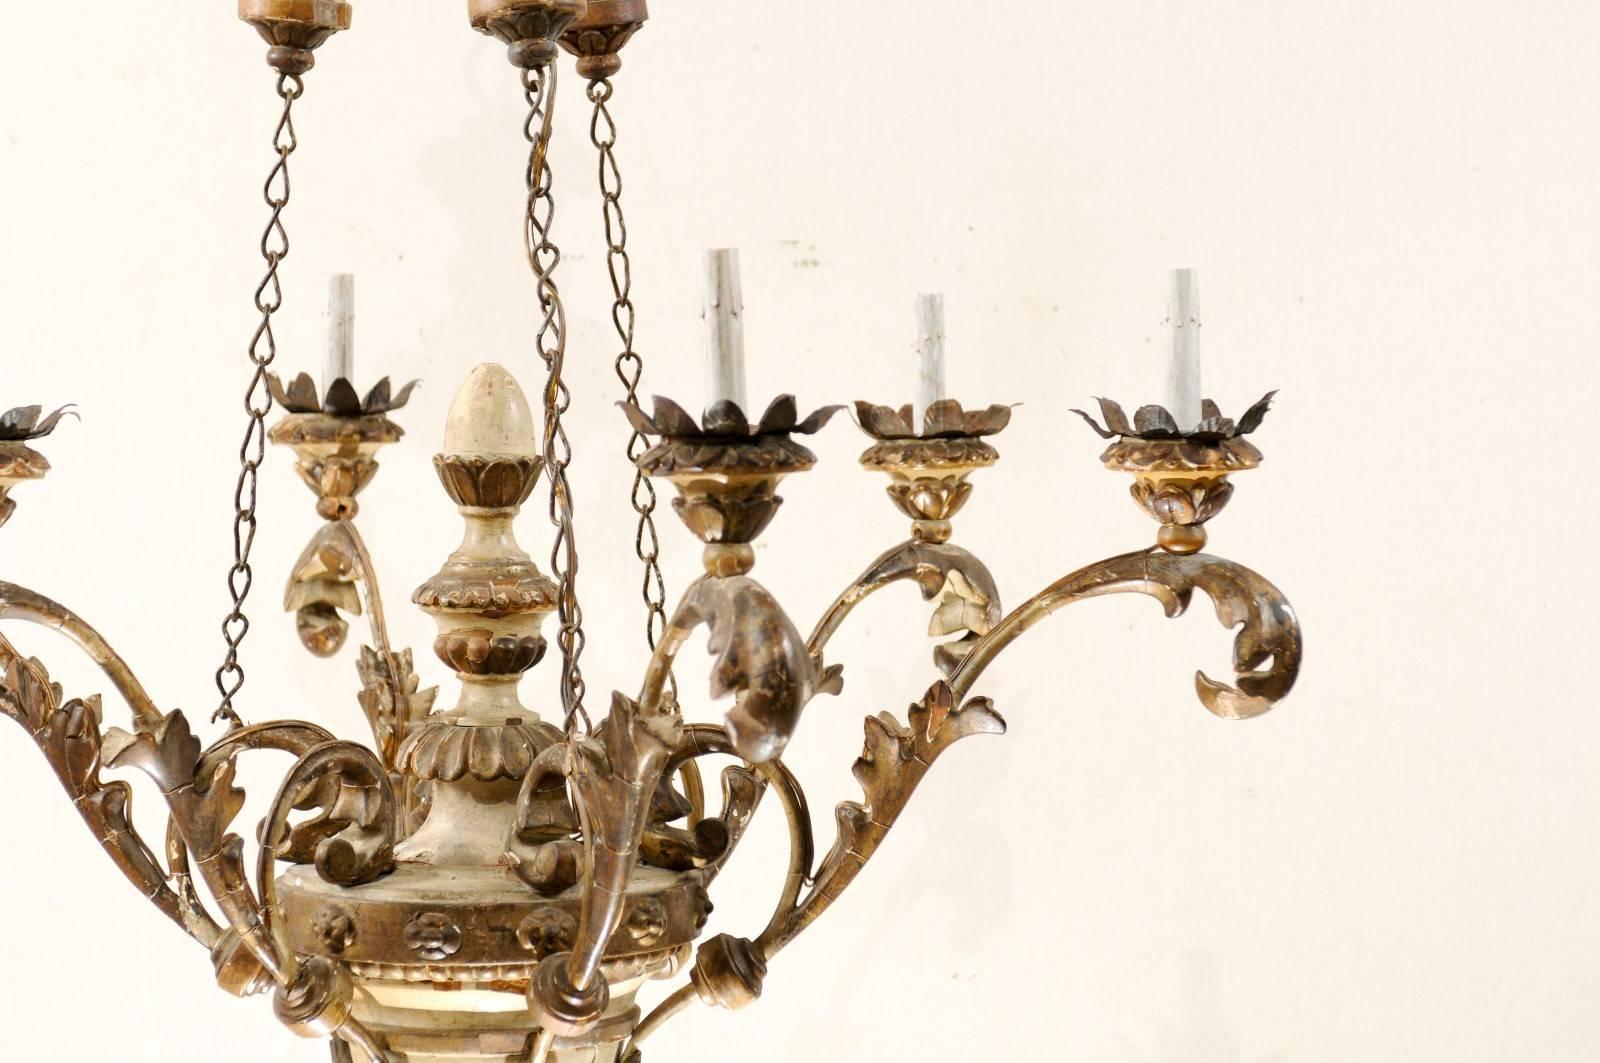 An Exquisite Pair of Italian Early 20th C. Carved & Painted Wood Chandeliers 5